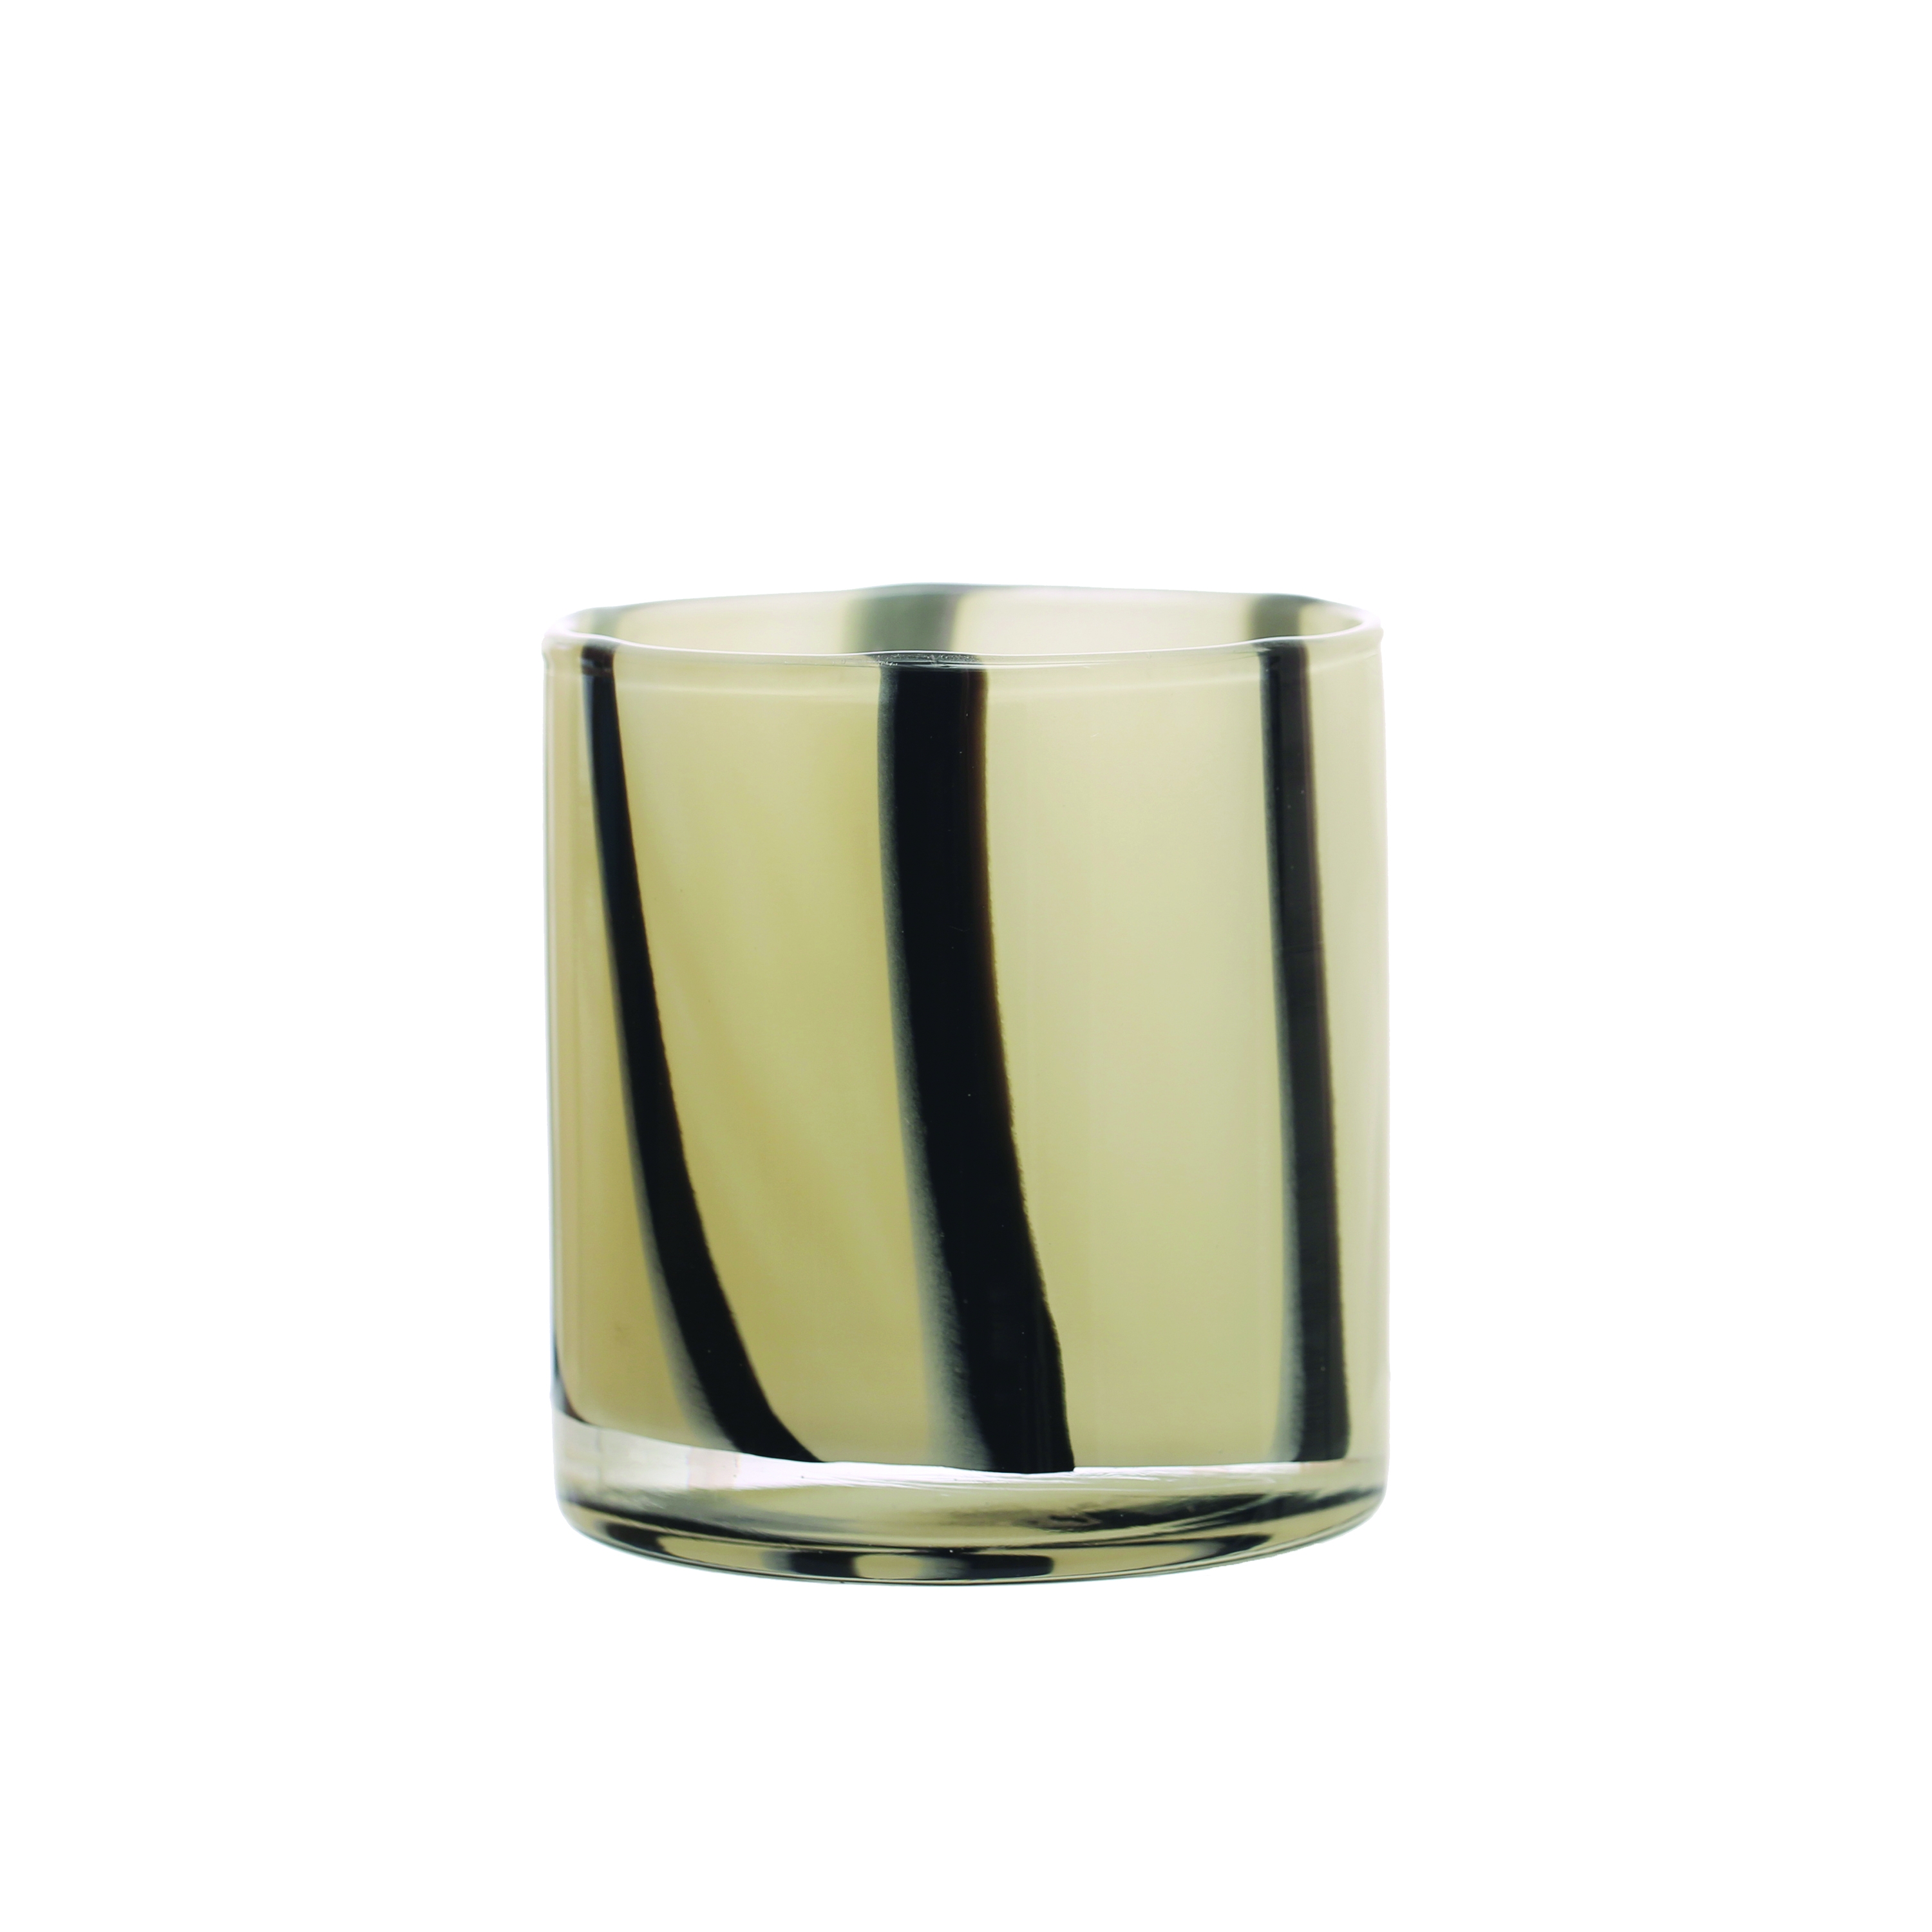 Round Glass Candle Holder/Vase with Stripes, Cream and Black - Image 0